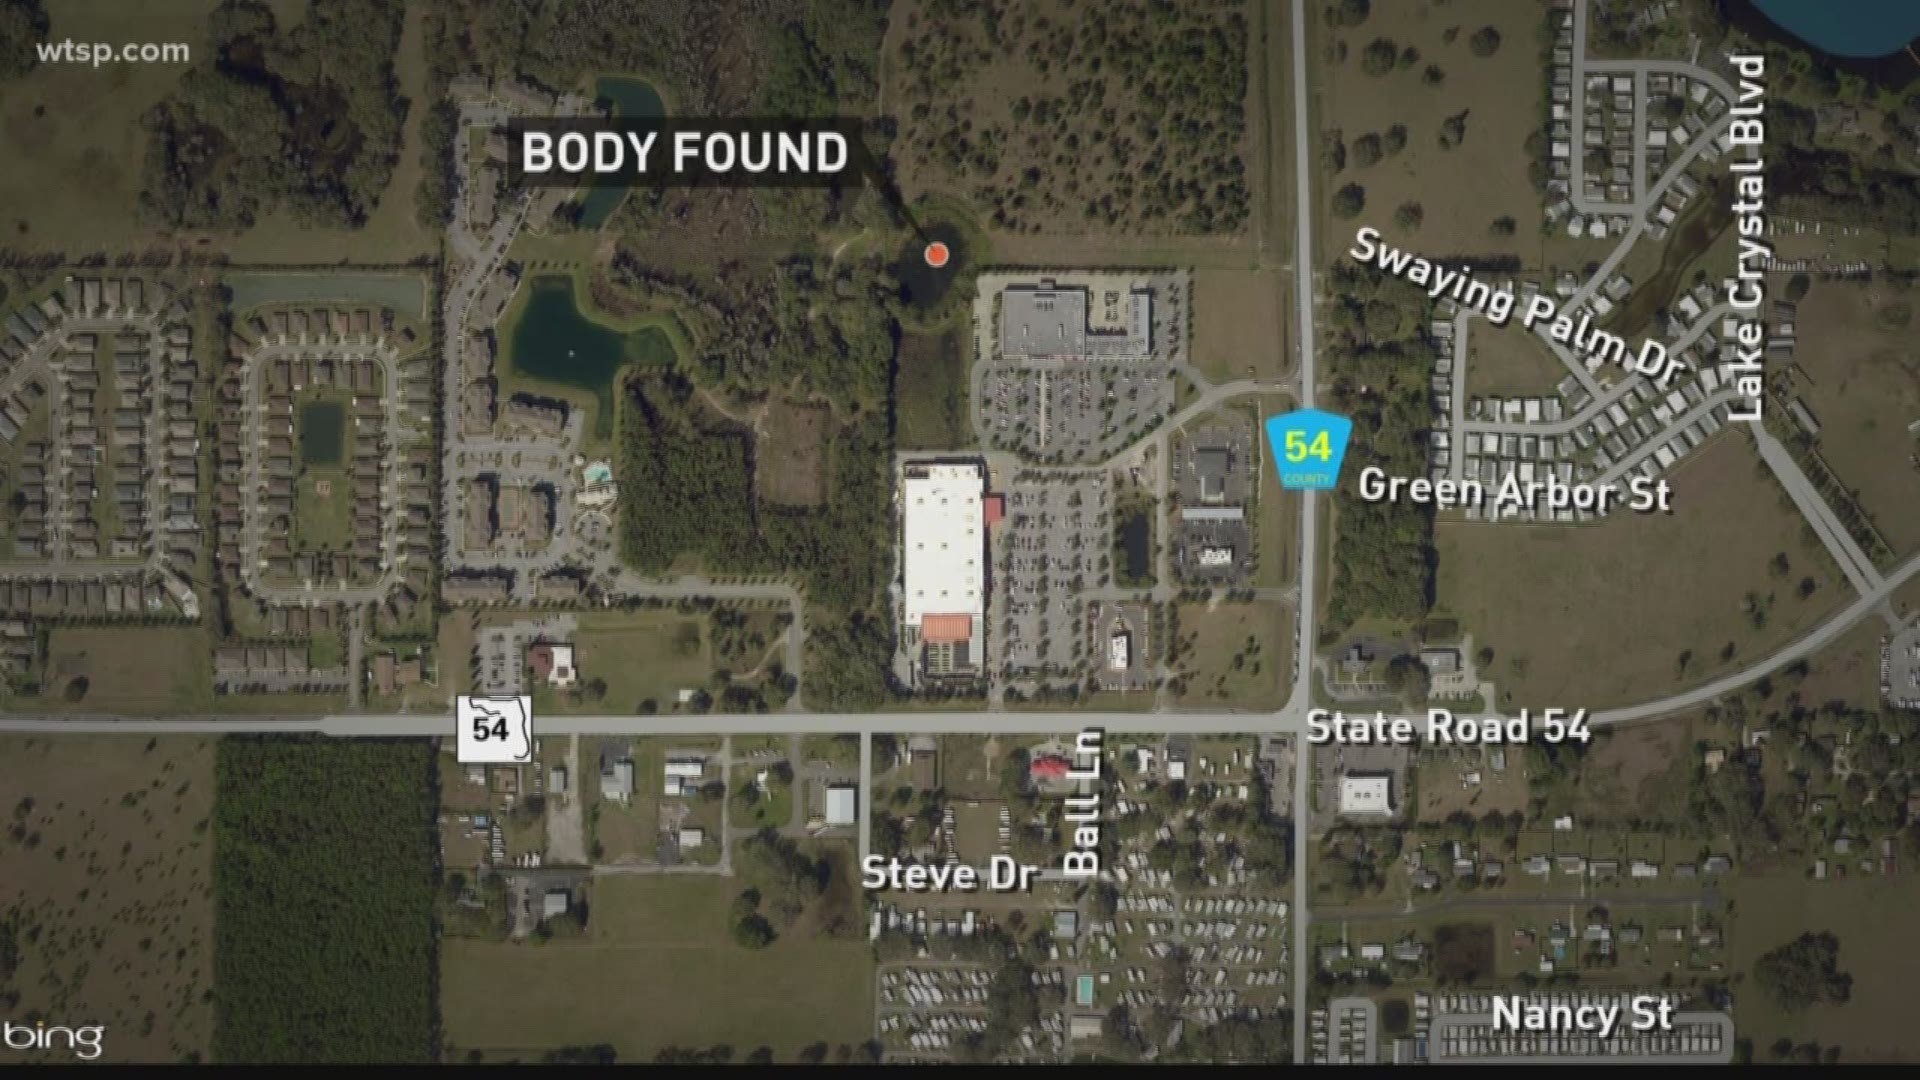 The body was found Tuesday afternoon near Zephyrhills.